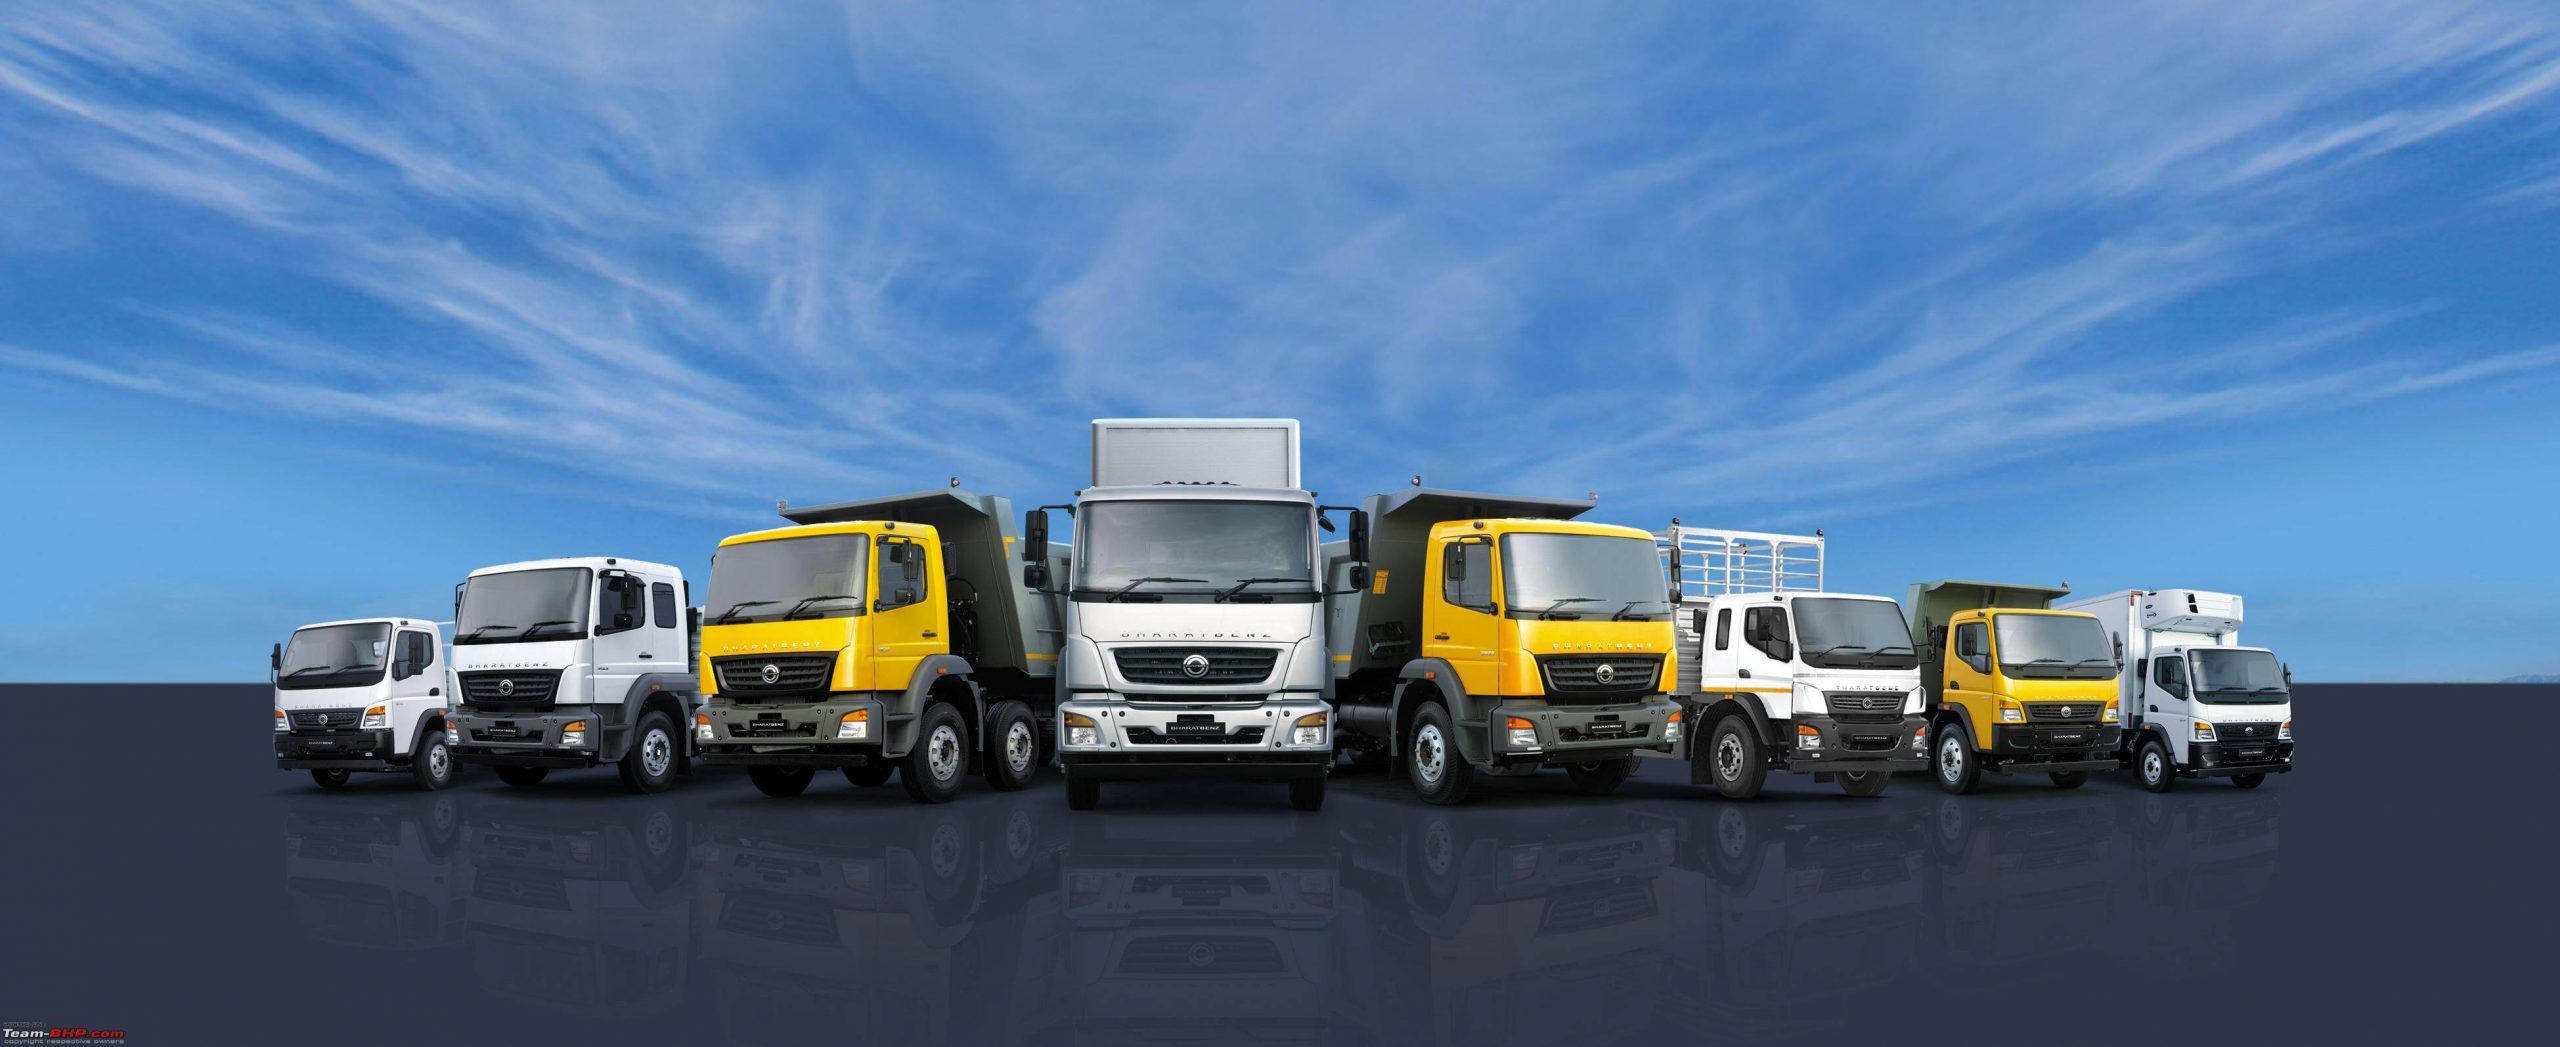 Commercial Vehicles Market Will Grow at CAGR During (2020 To 2027) | Renault, Hyundai, Isuzu, Toyota